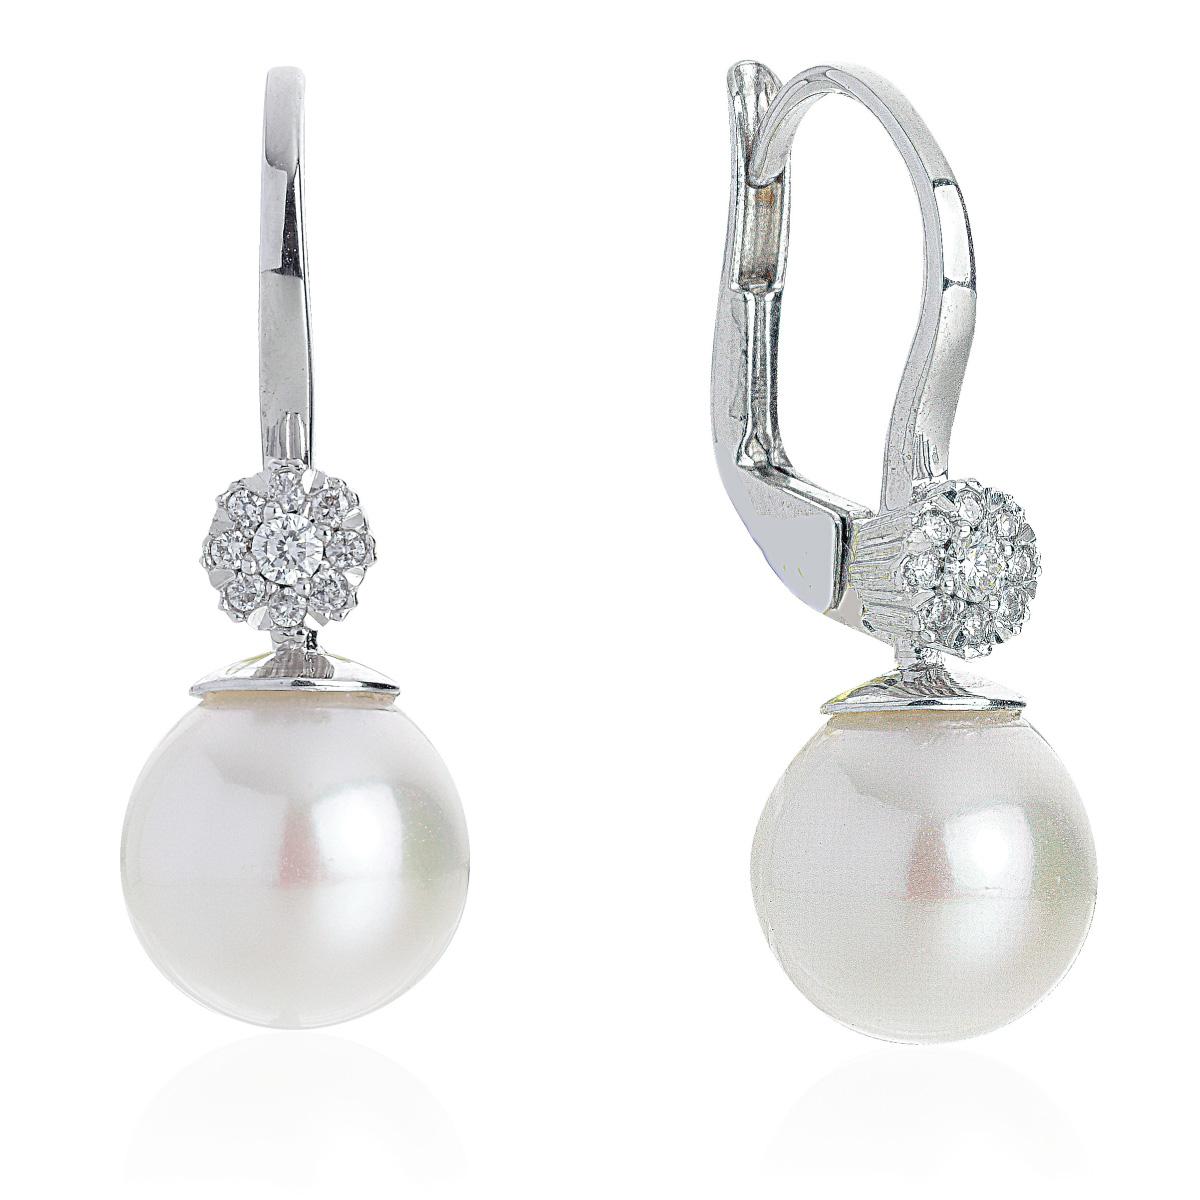 Hook earrings in 18 kt white gold with diamonds and sea pearls 8.50-9 mm - OD384-LB